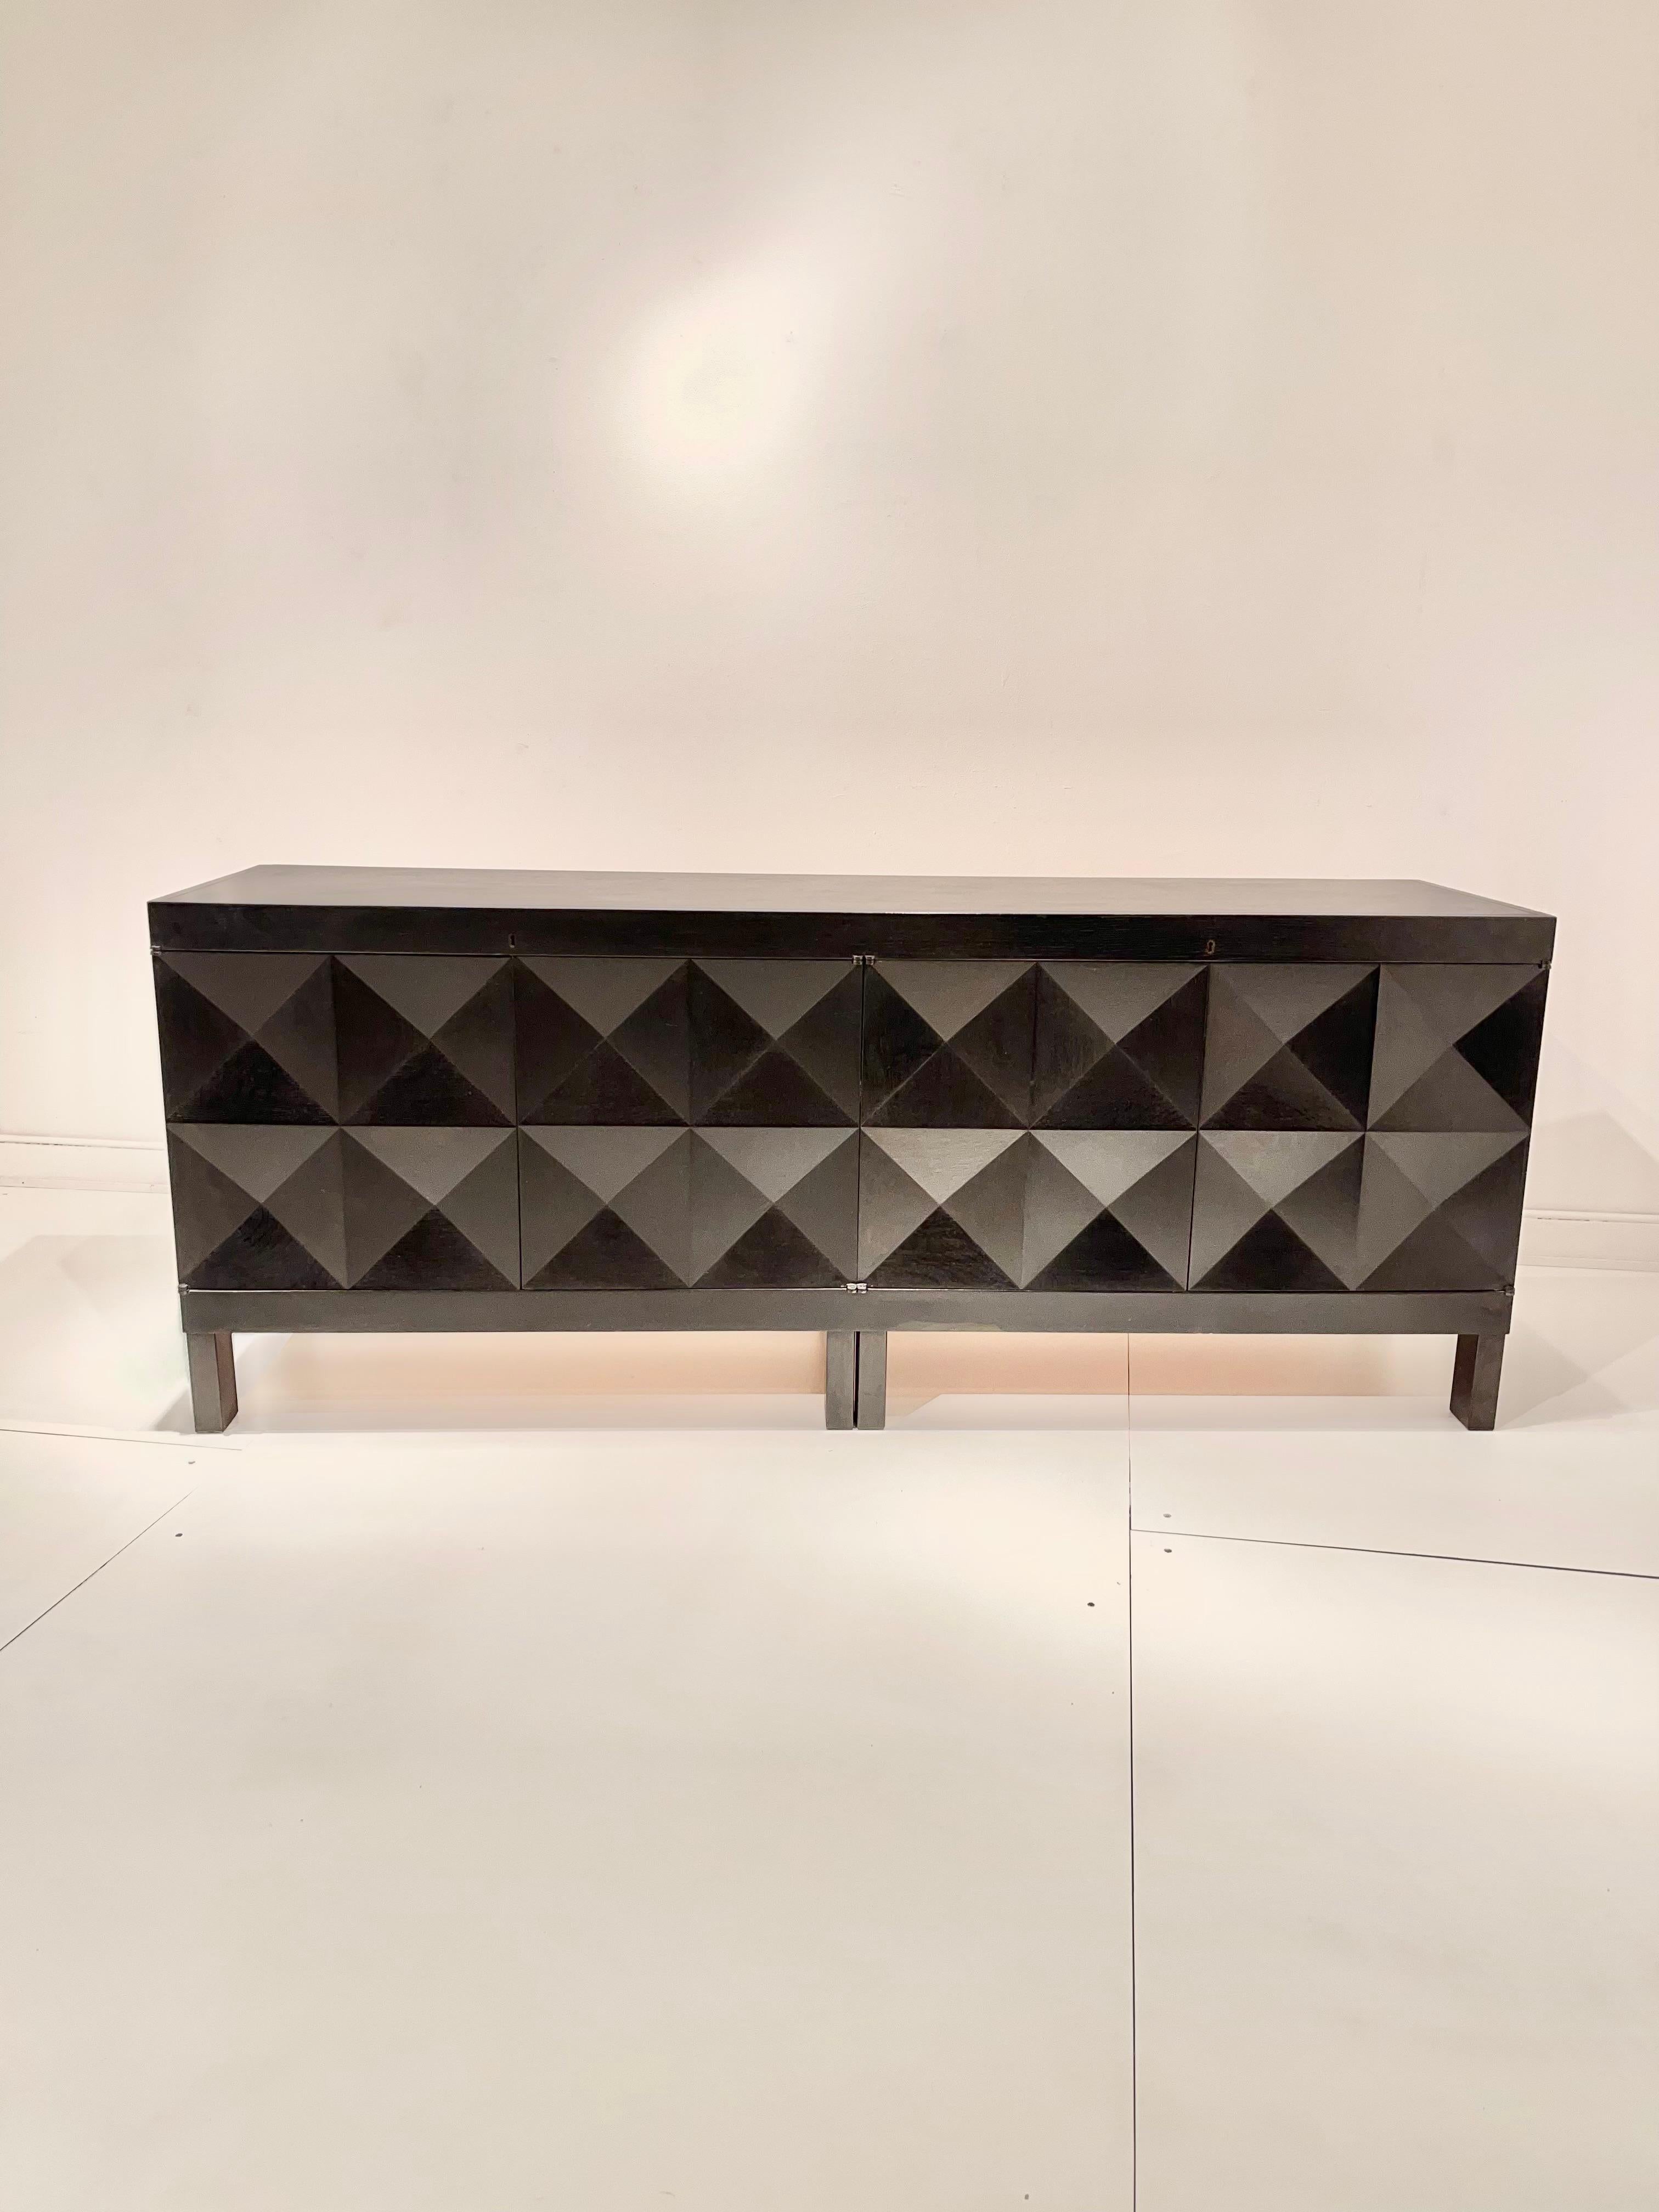 De Coene black oak painted cabinet in 2 parts , made in Belgium in the 1970s. Brutalist sideboards . More famous are his similar designs with a diamond pattern or a wavy pattern. Included key and in excellent original condition. with